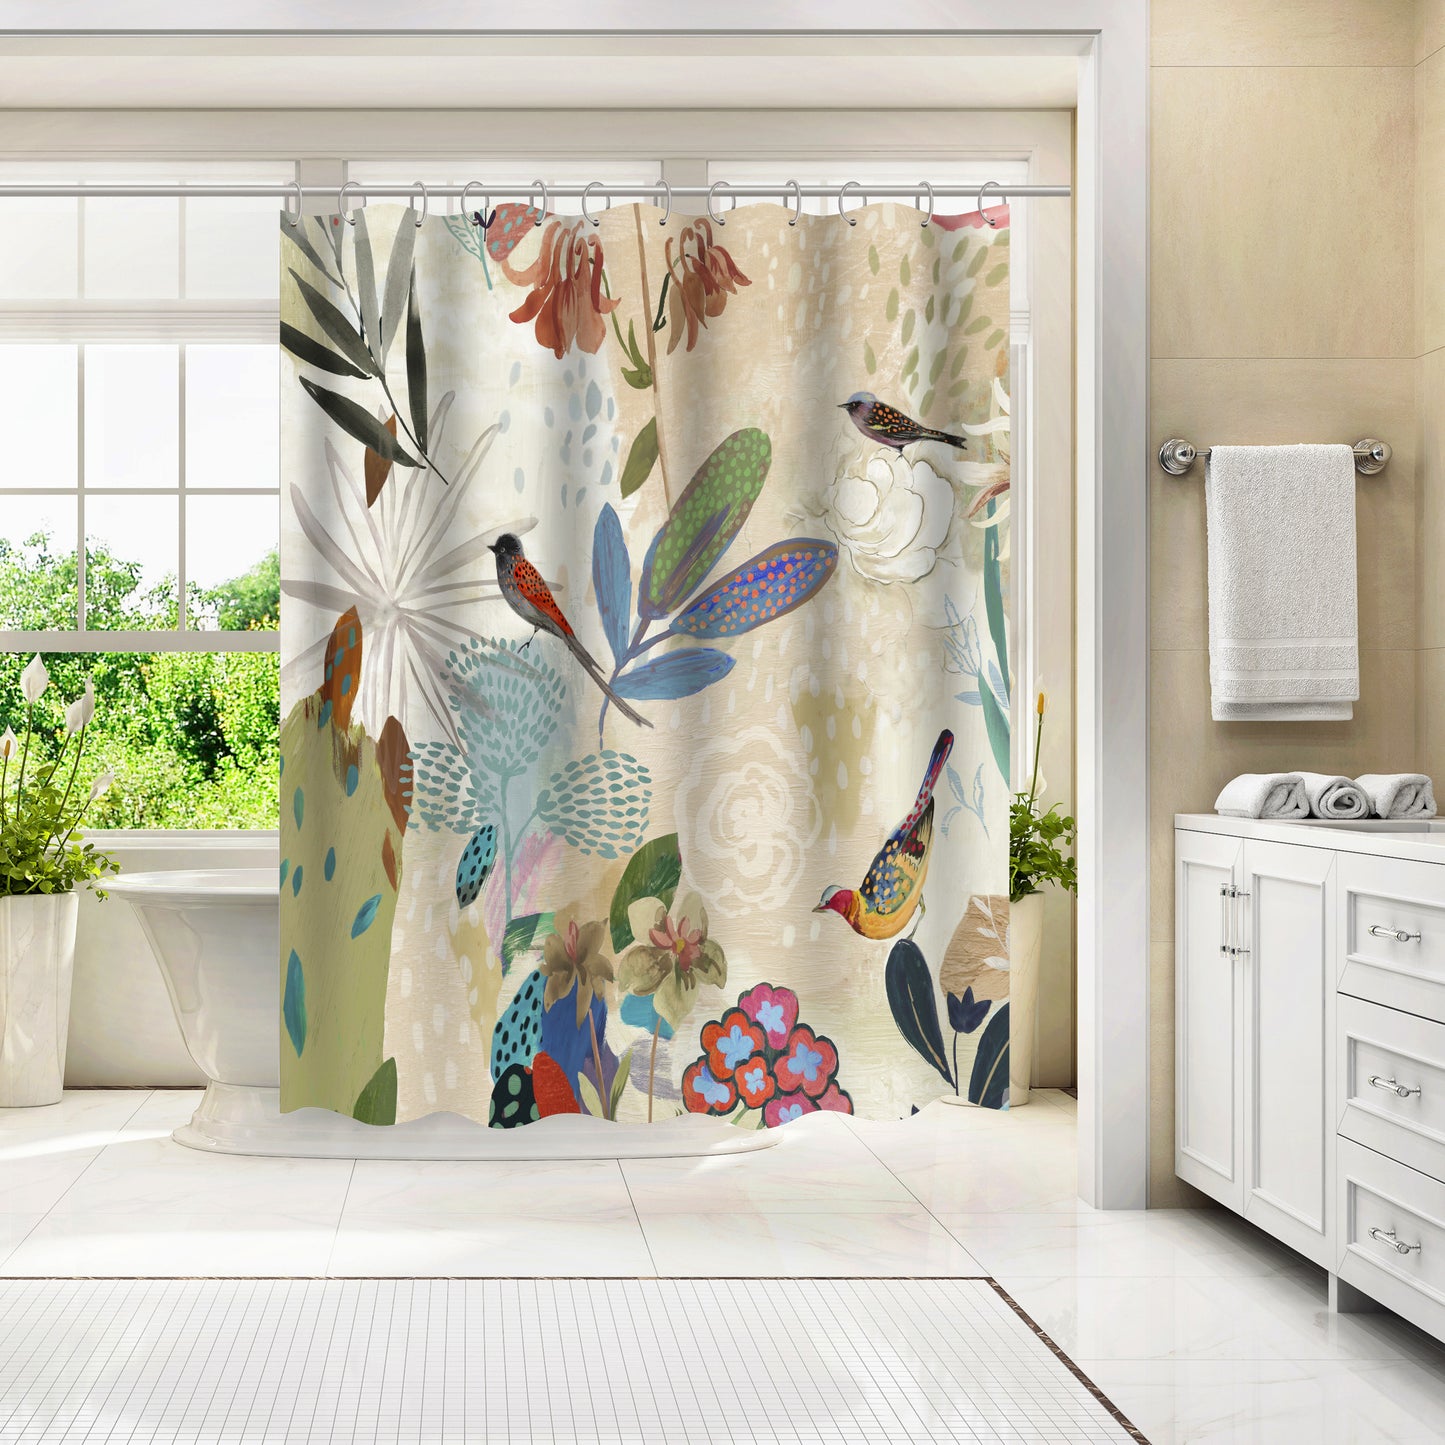 71" x 74" Abstract Shower Curtain with 12 Hooks, Where The Passion Flower Grows I by PI Creative Art